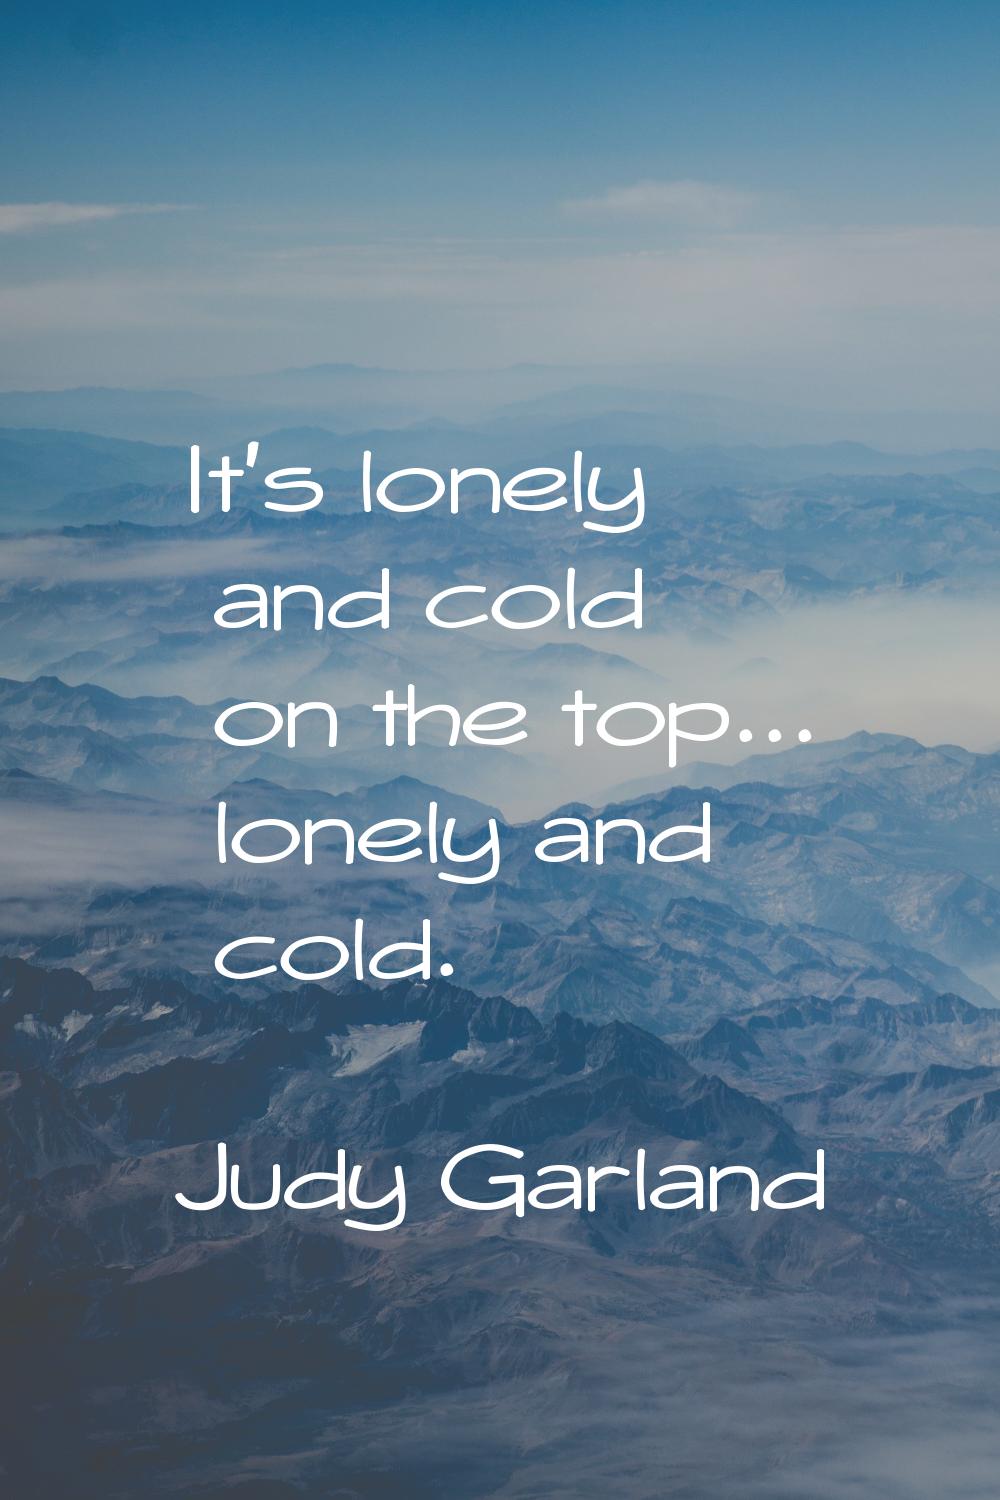 It's lonely and cold on the top... lonely and cold.